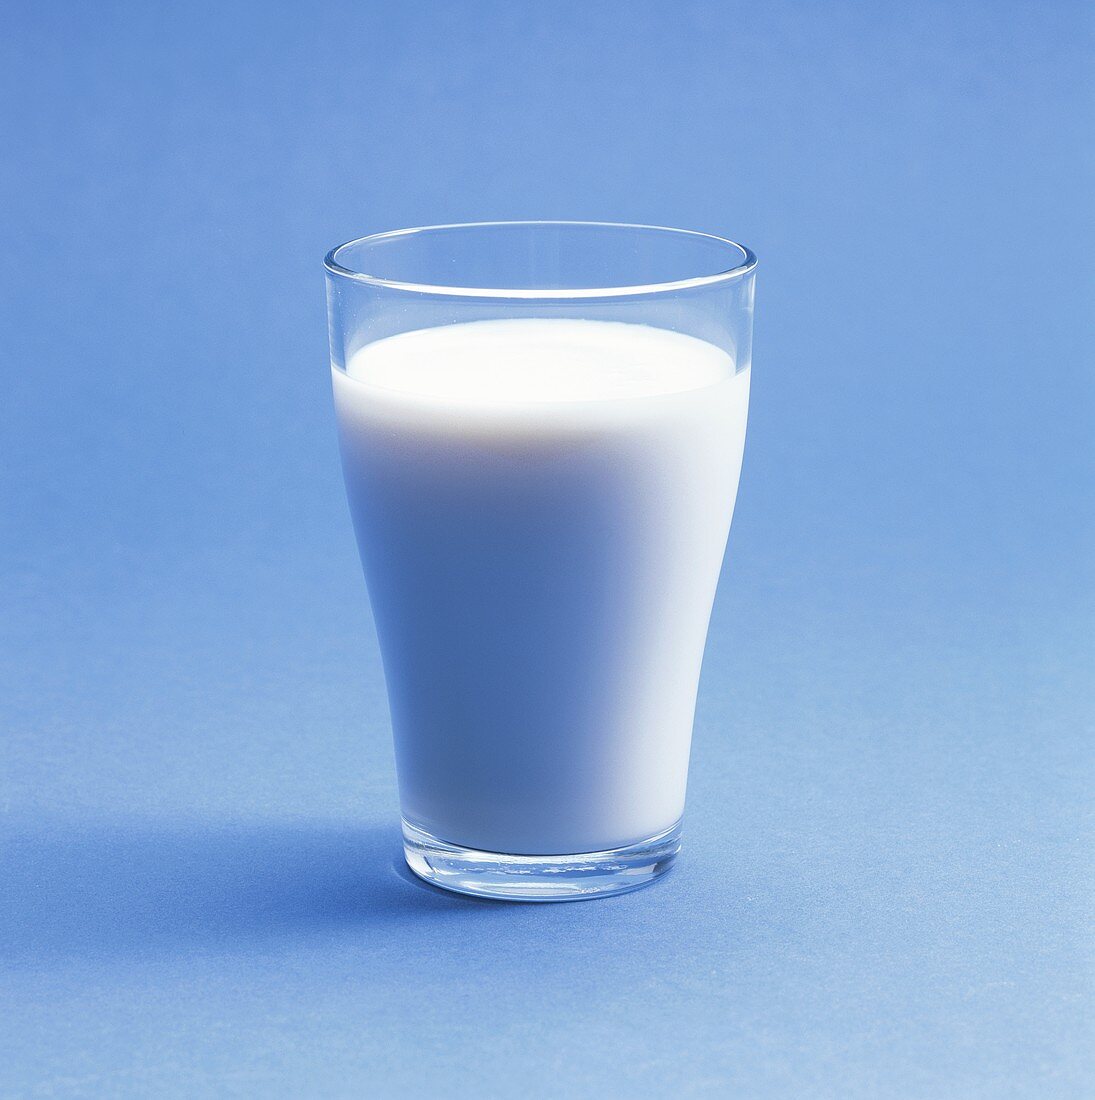 A glass of milk on a blue background